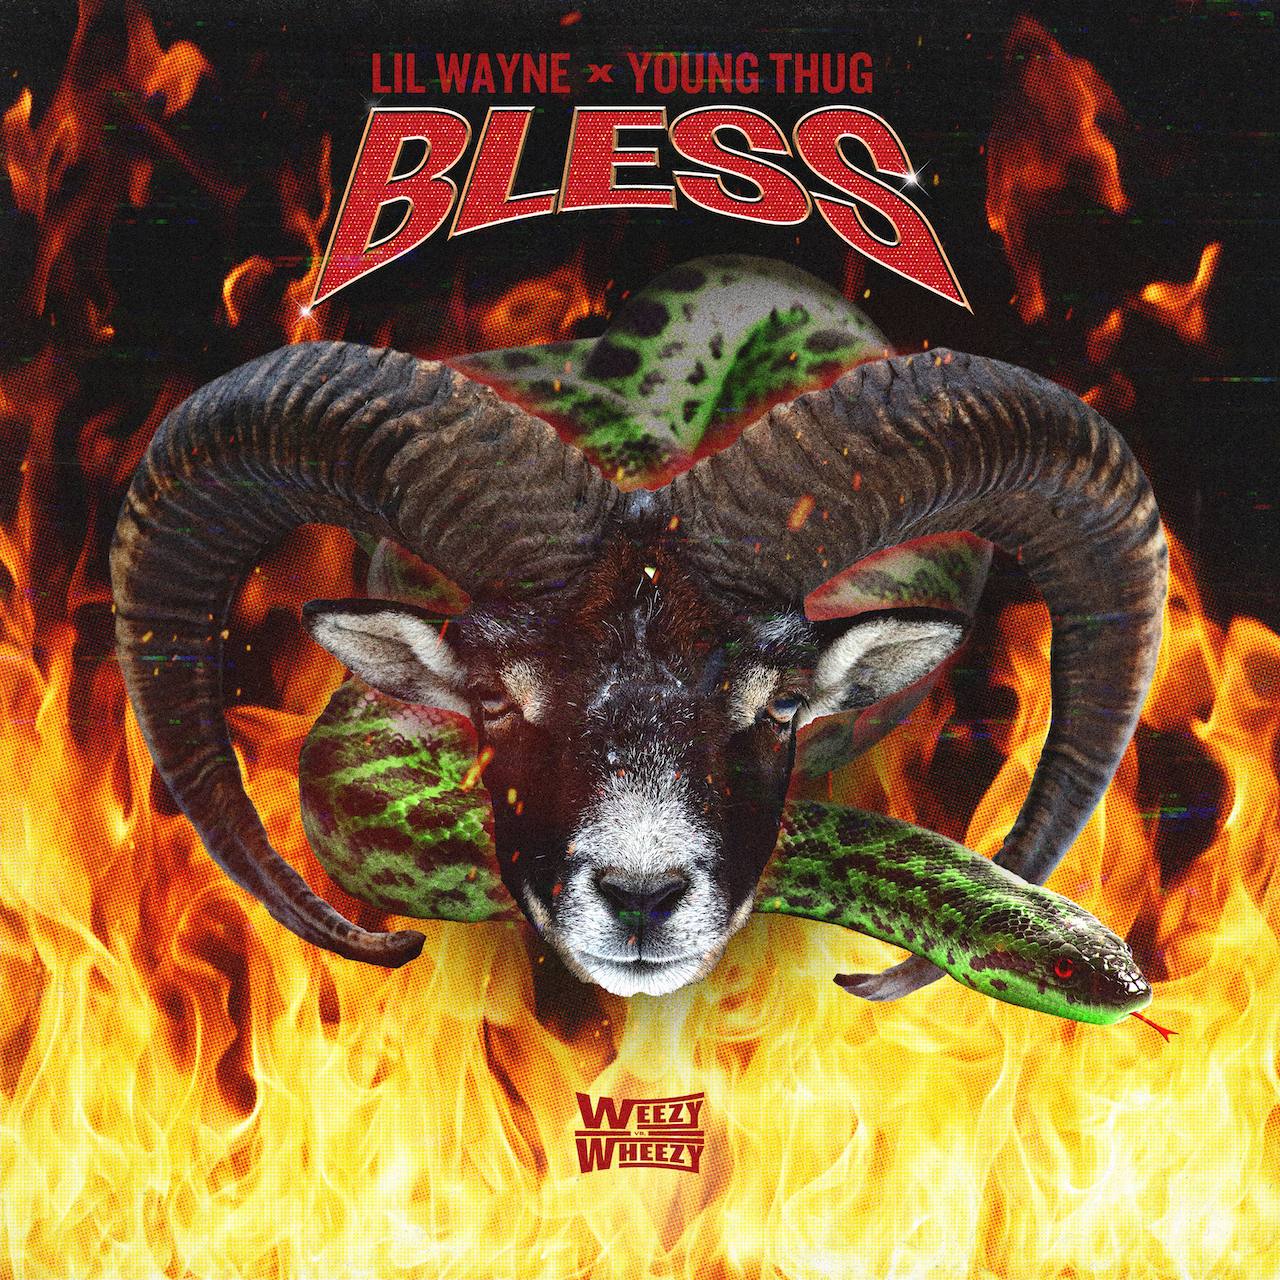 Lil Wayne Recruits Young Thug For New Single ‘Bless’ #YoungThug